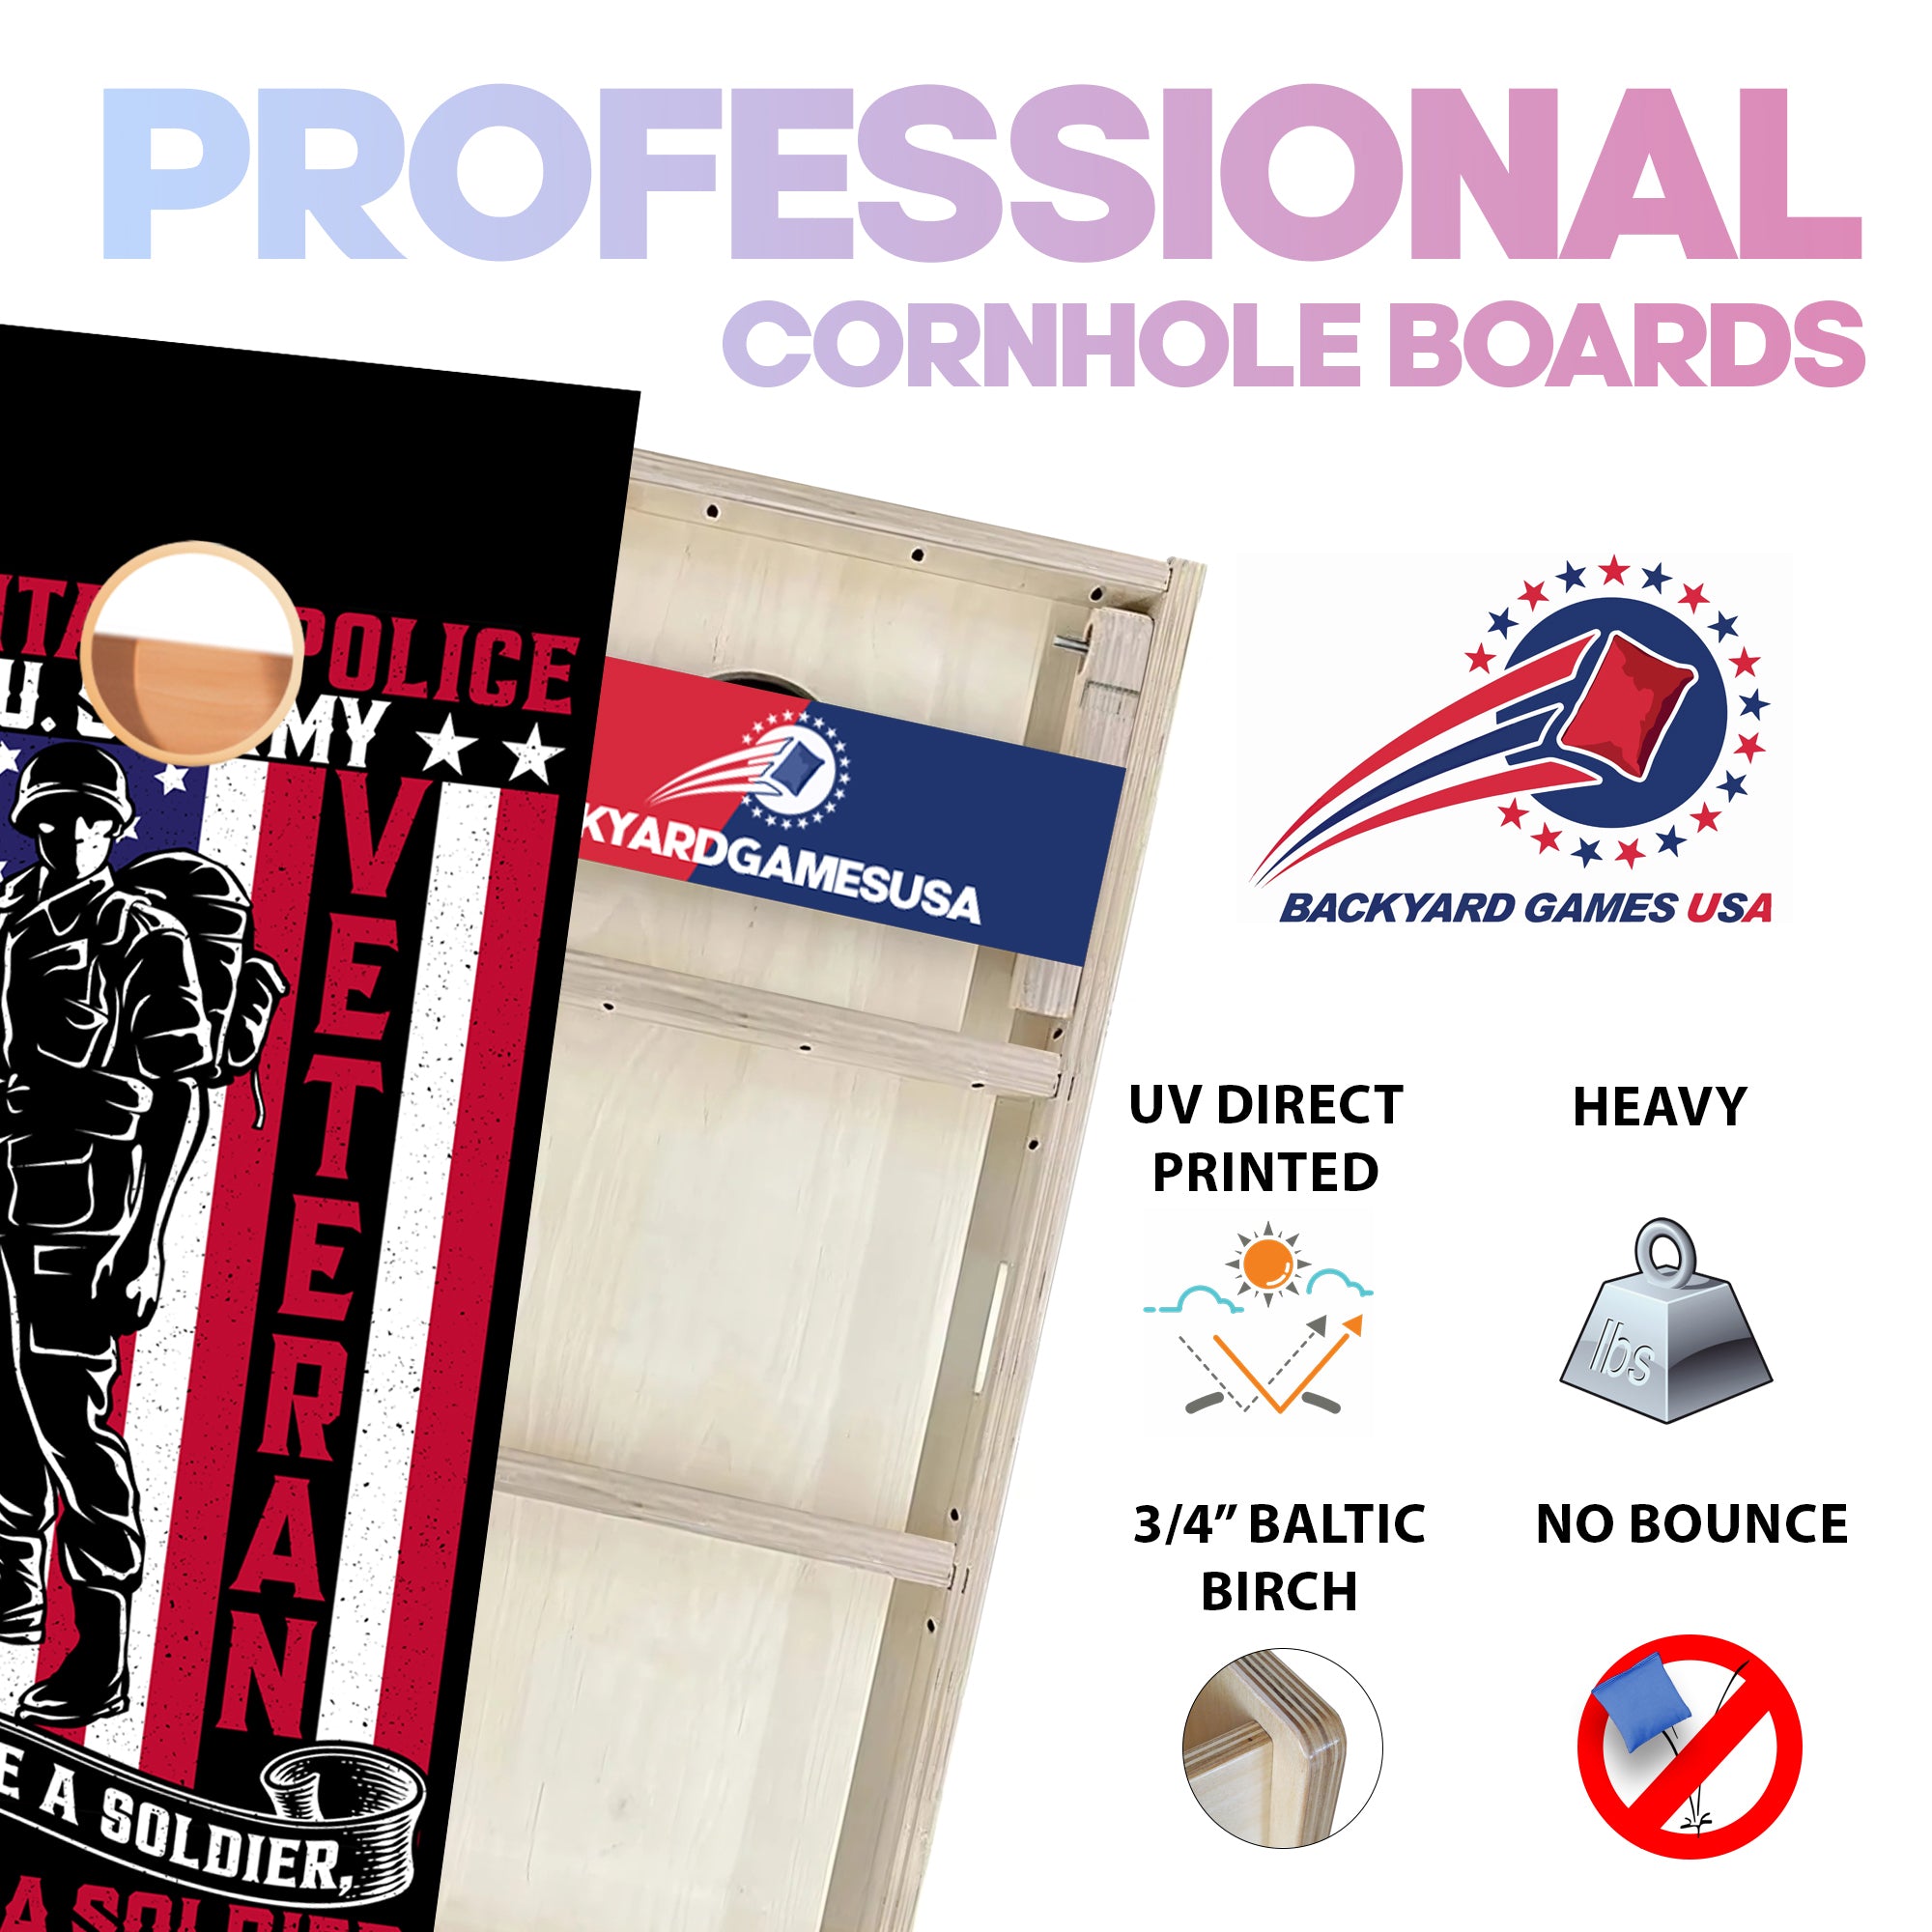 Always A Soldier Professional Cornhole Boards